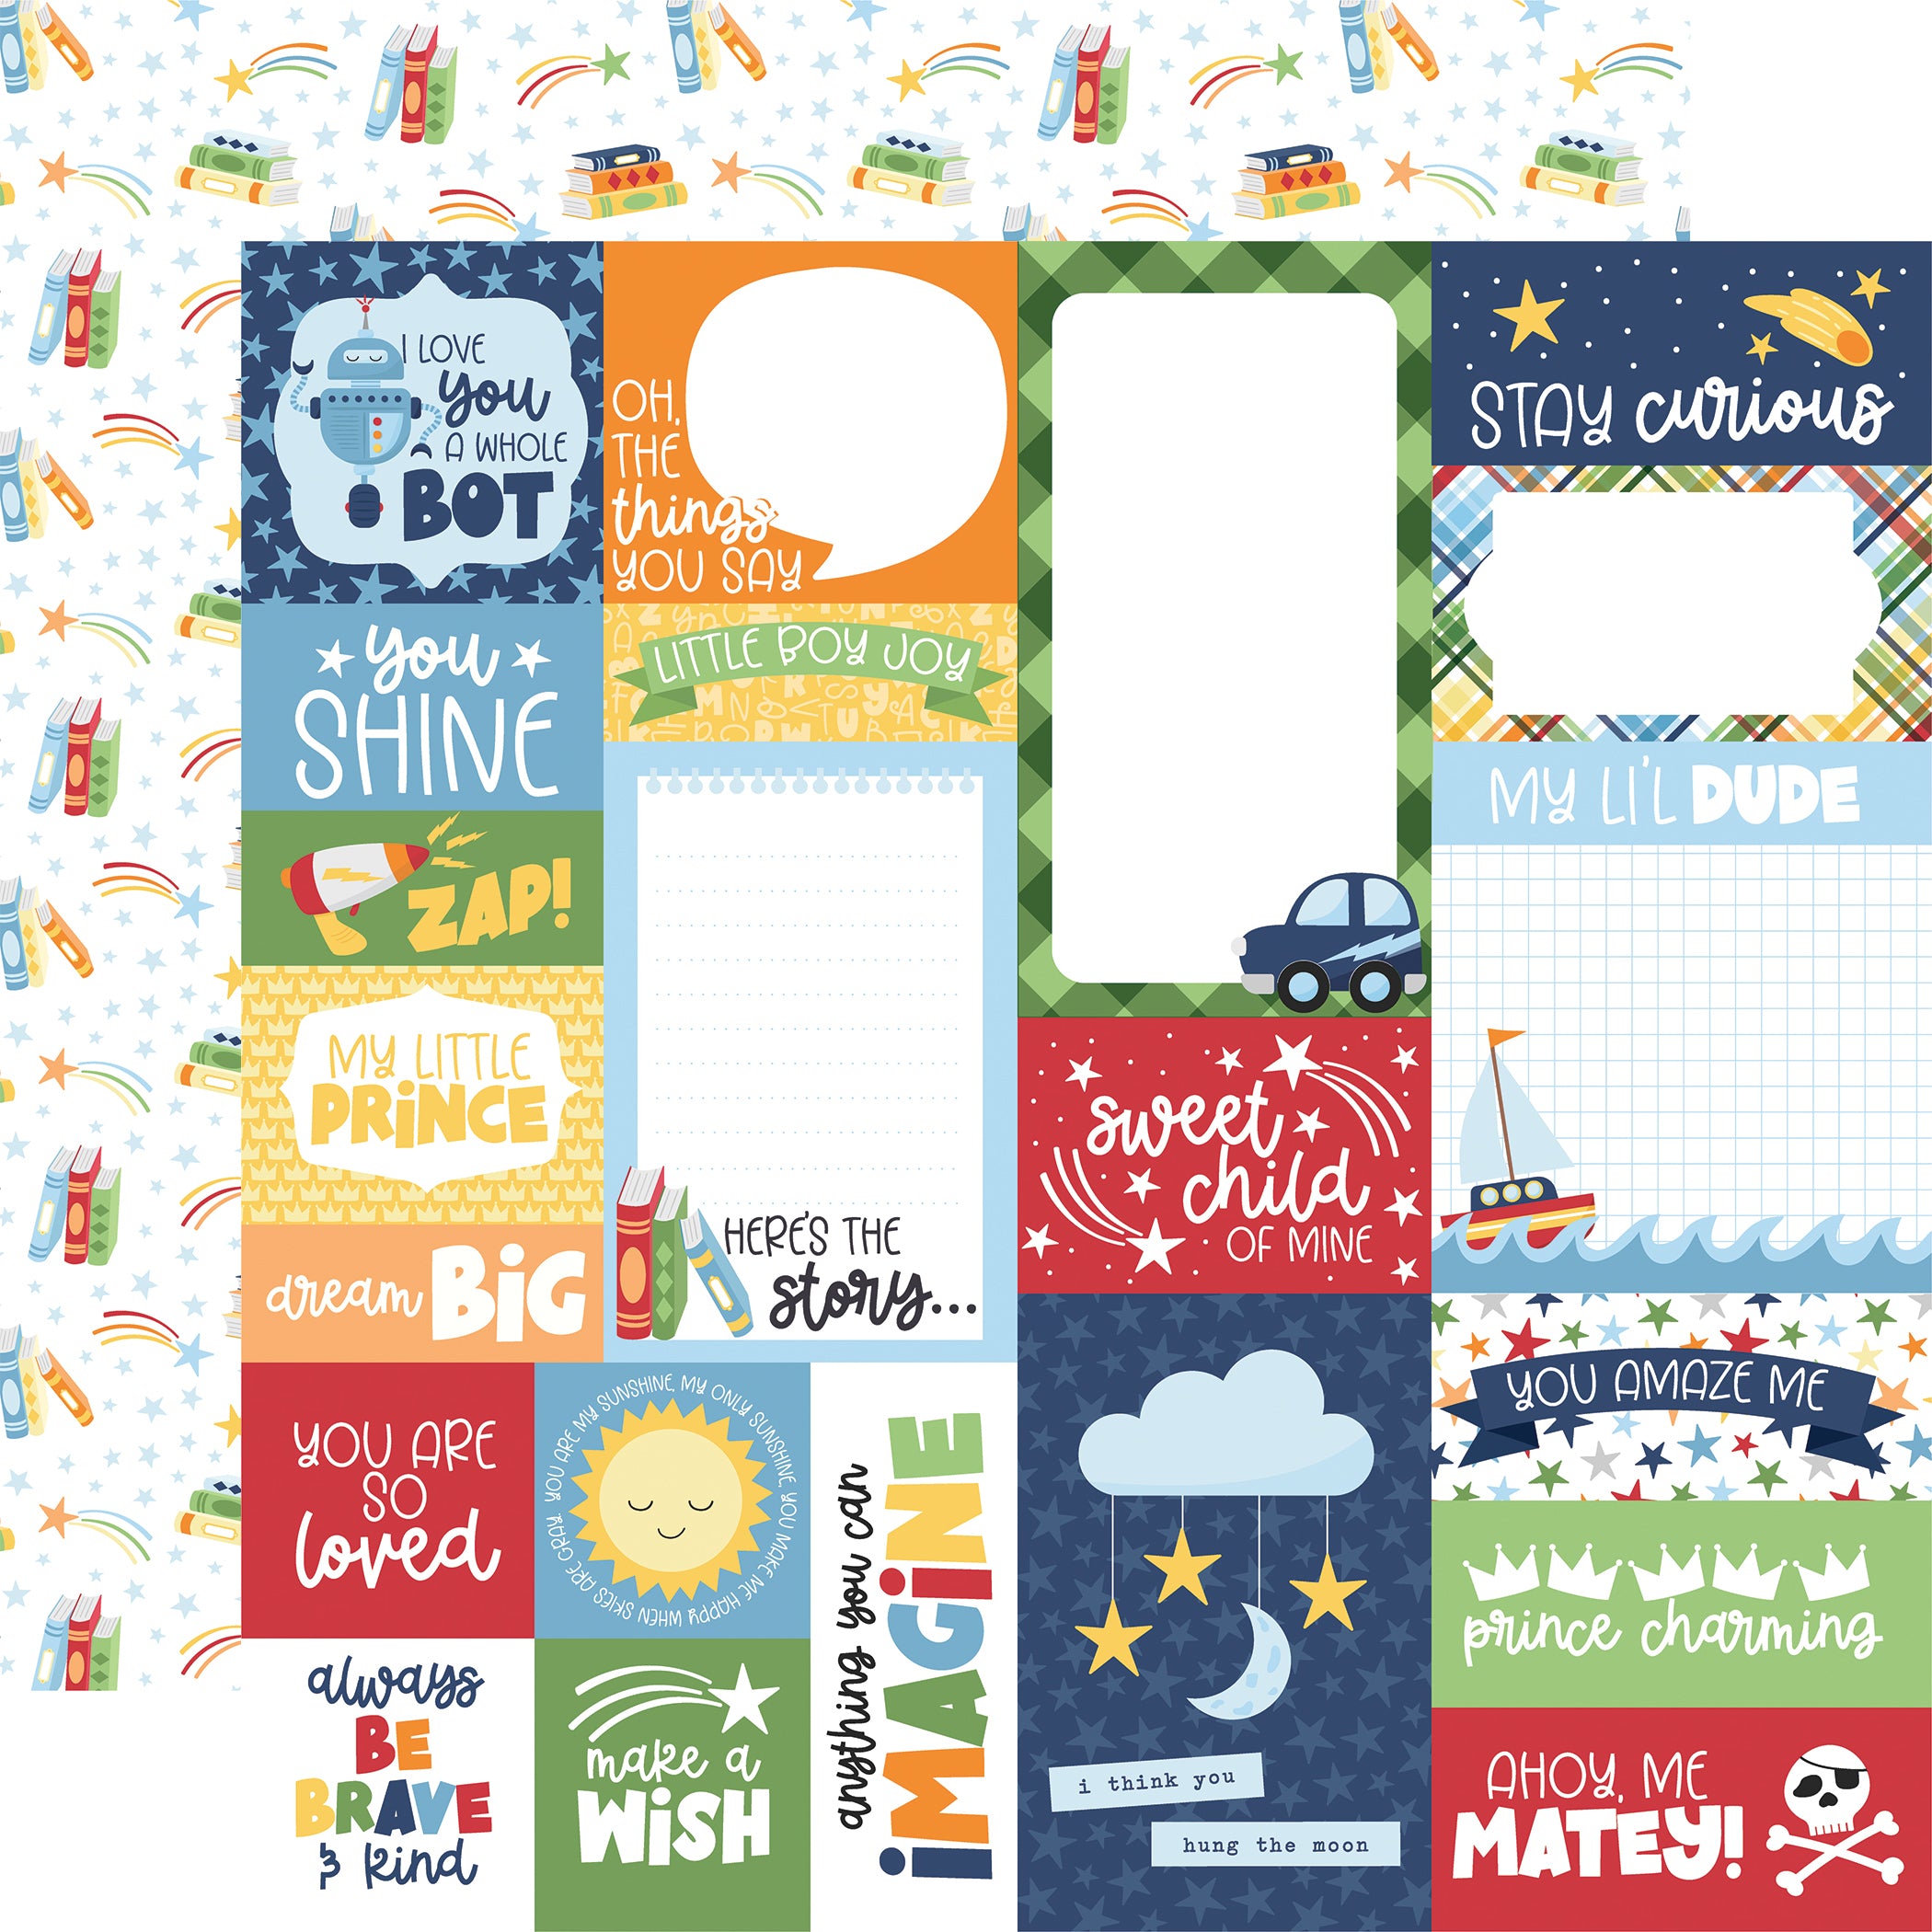 My Little Boy Collection 12 x 12 Scrapbook Collection Kit by Echo Park Paper